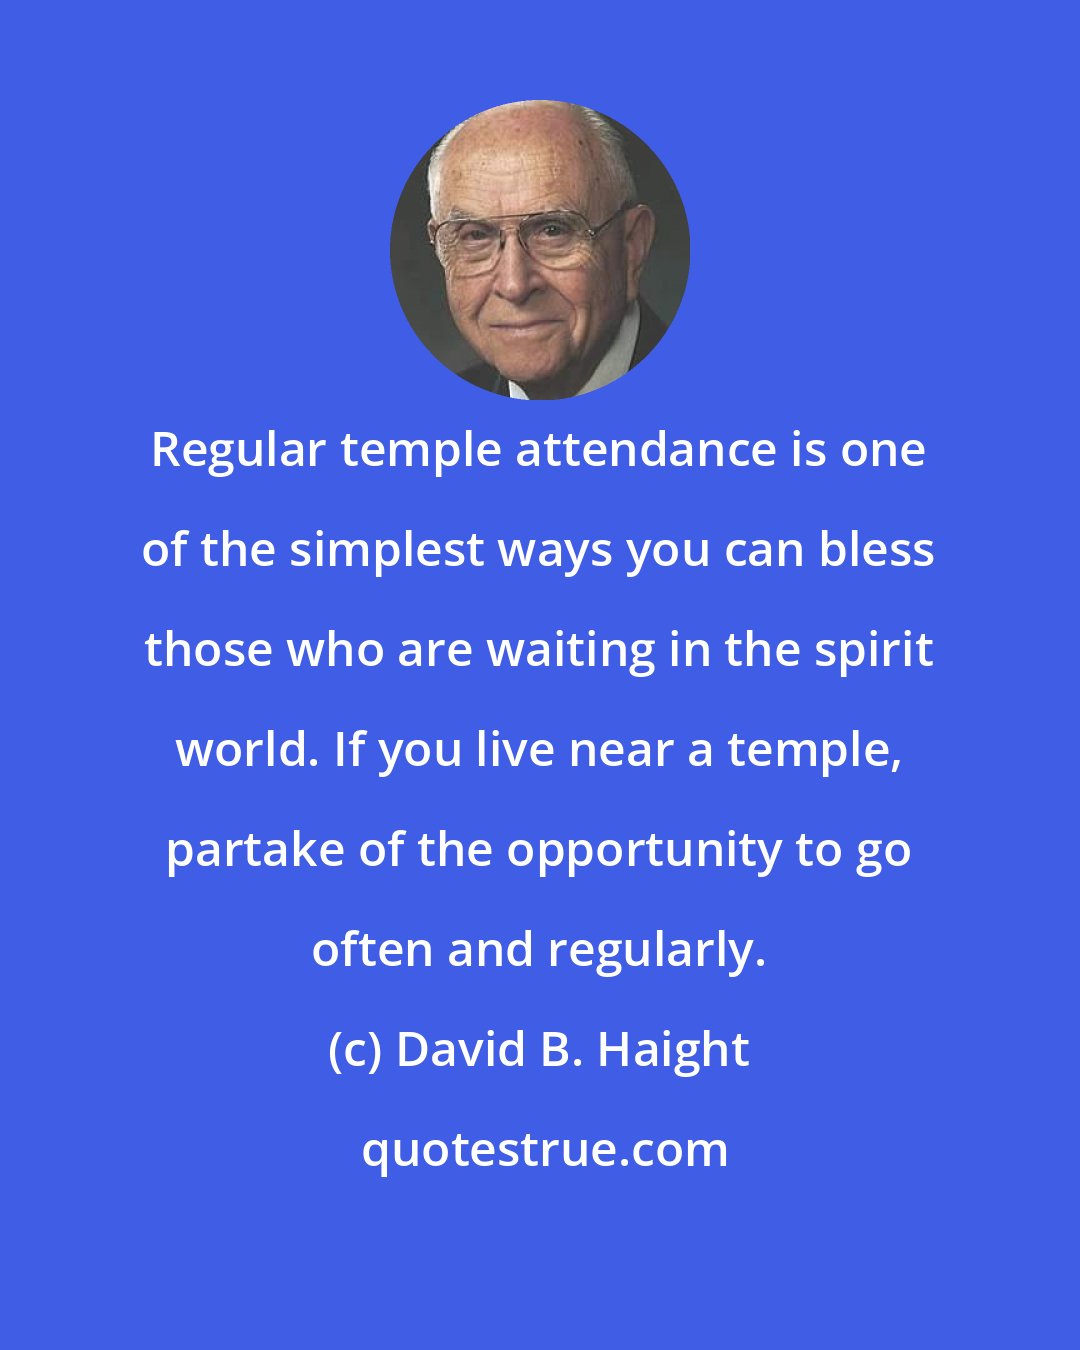 David B. Haight: Regular temple attendance is one of the simplest ways you can bless those who are waiting in the spirit world. If you live near a temple, partake of the opportunity to go often and regularly.